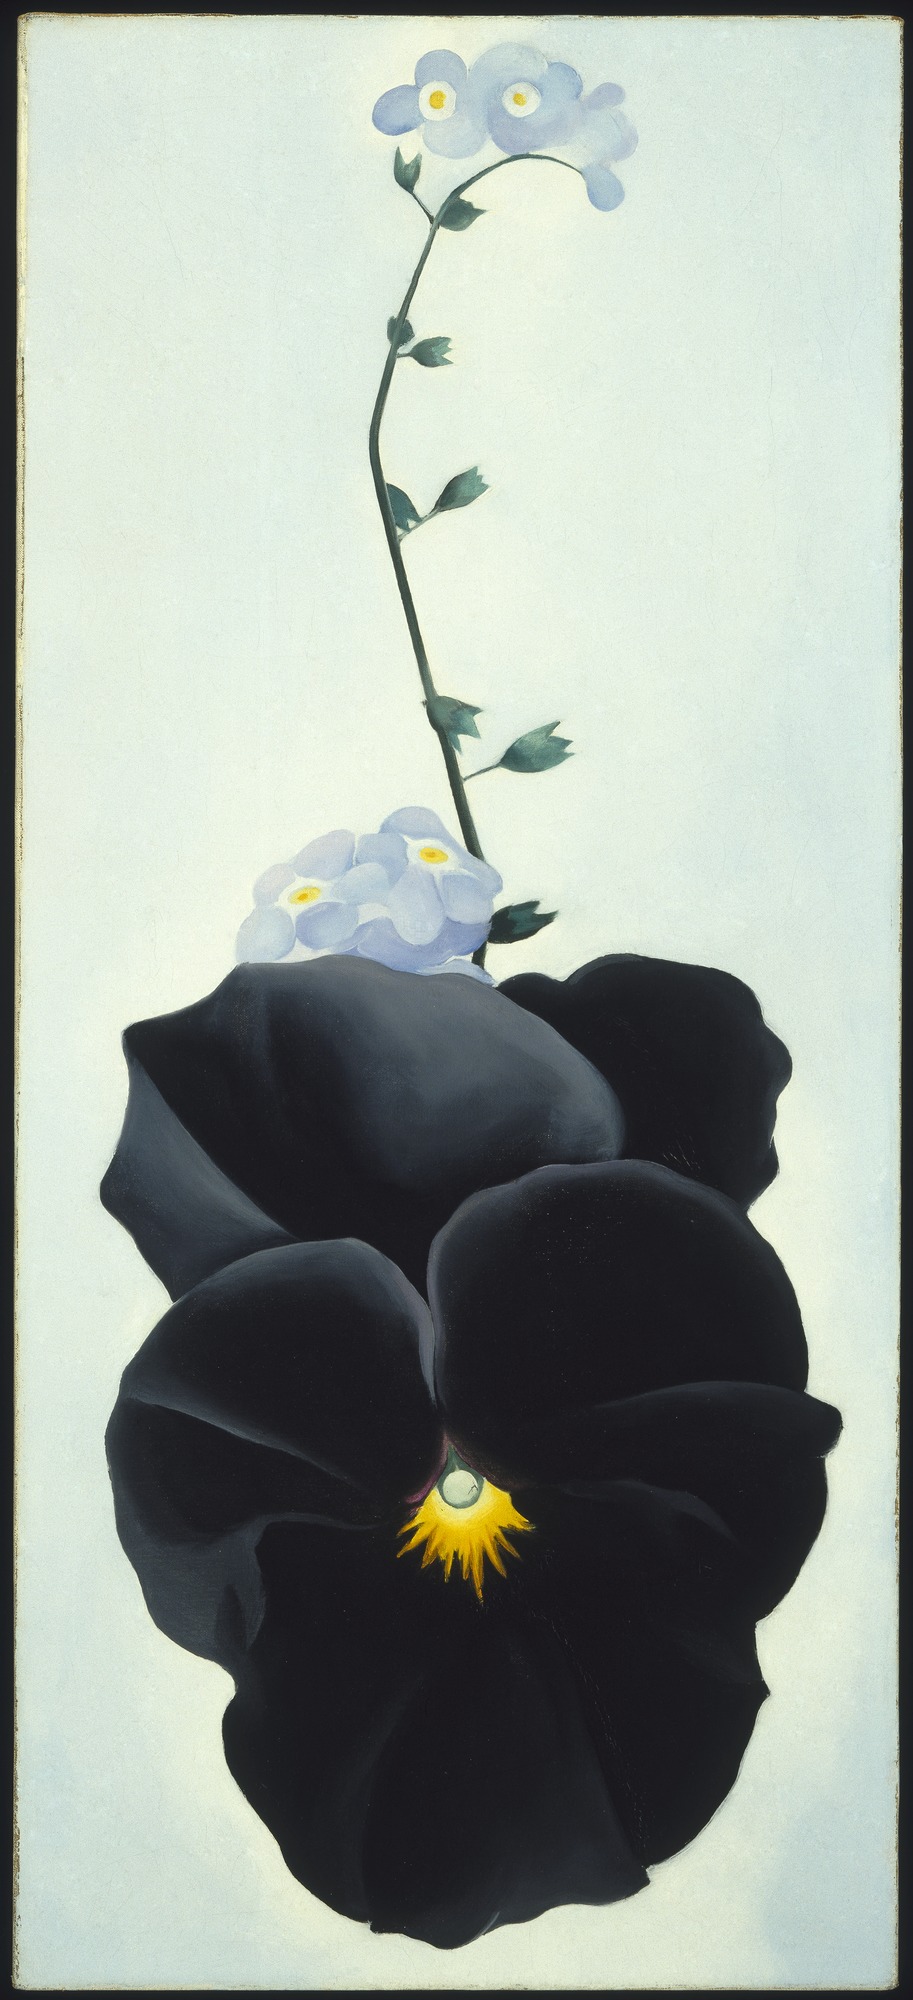 Georgia O'Keeffe. Black Pansy & Forget-Me-Nots (Pansy). 1926. Source: Brooklyn Museum